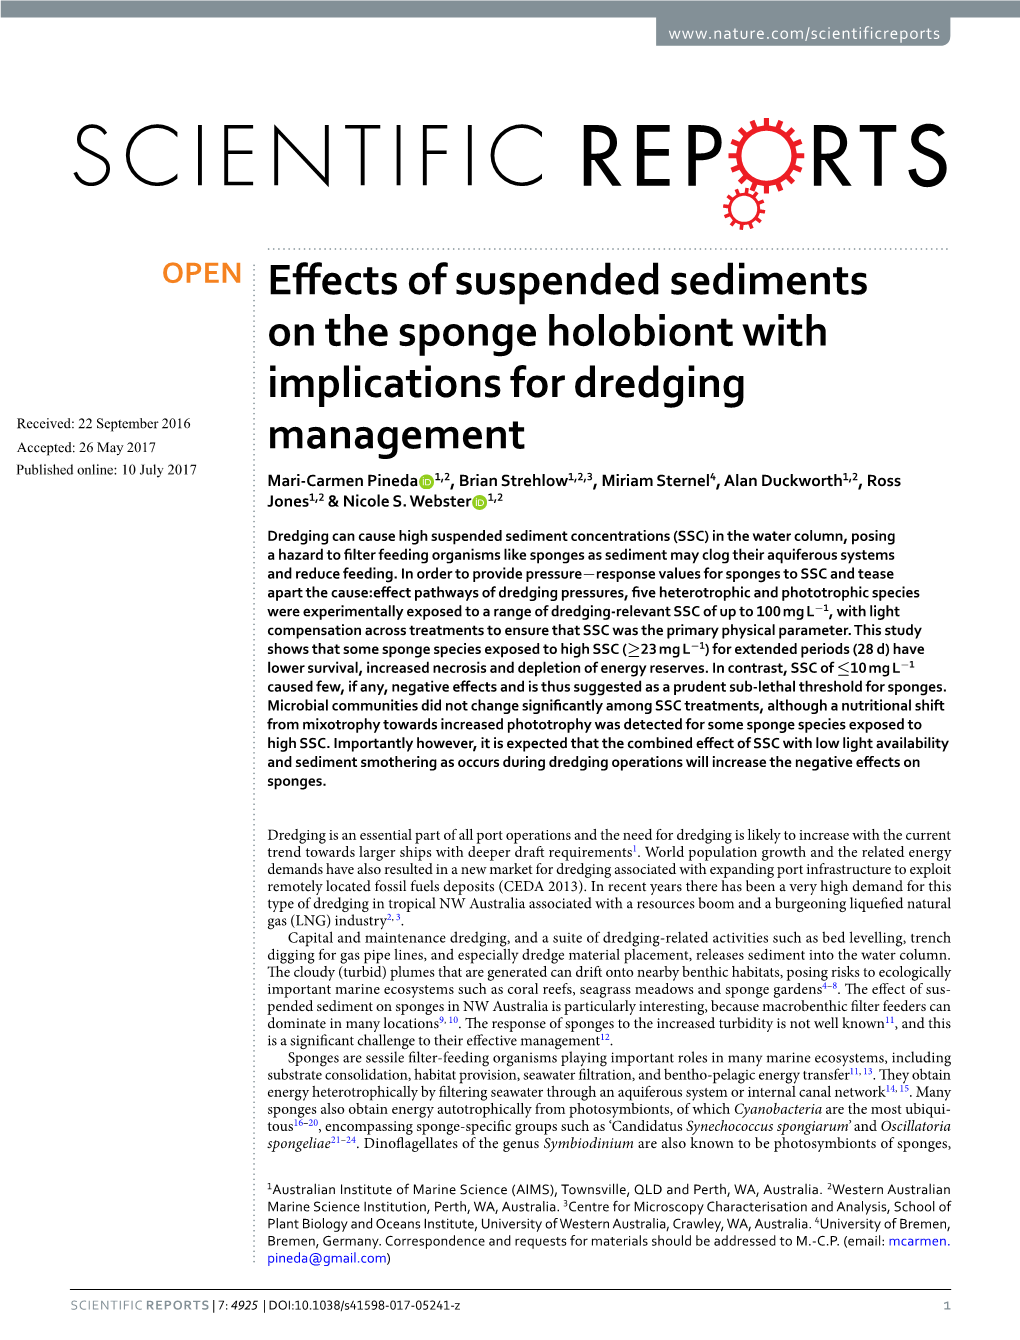 Effects of Suspended Sediments on the Sponge Holobiont with Implications